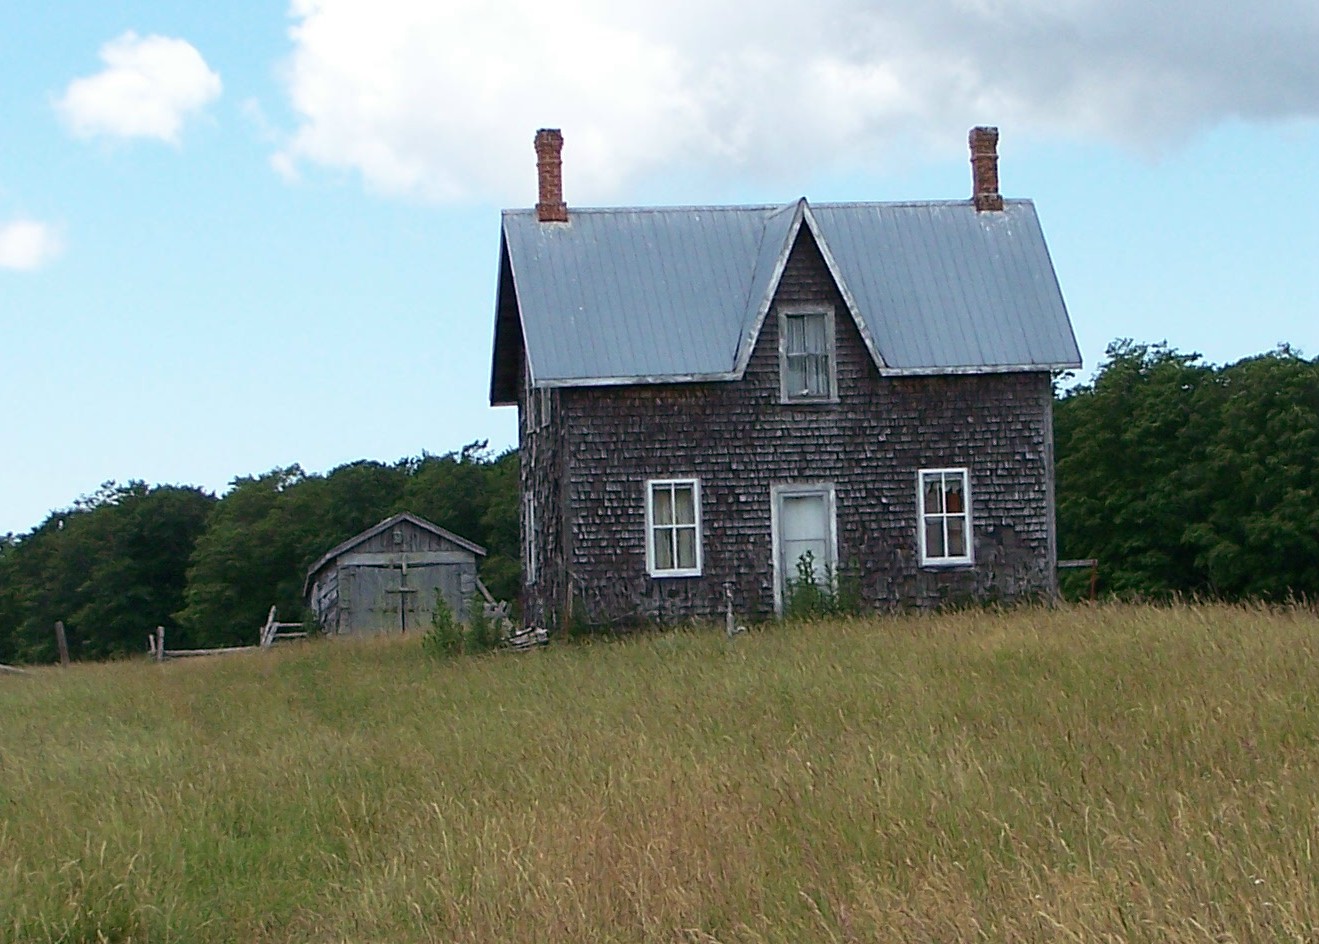 there is an old wooden house in the middle of a grassy field